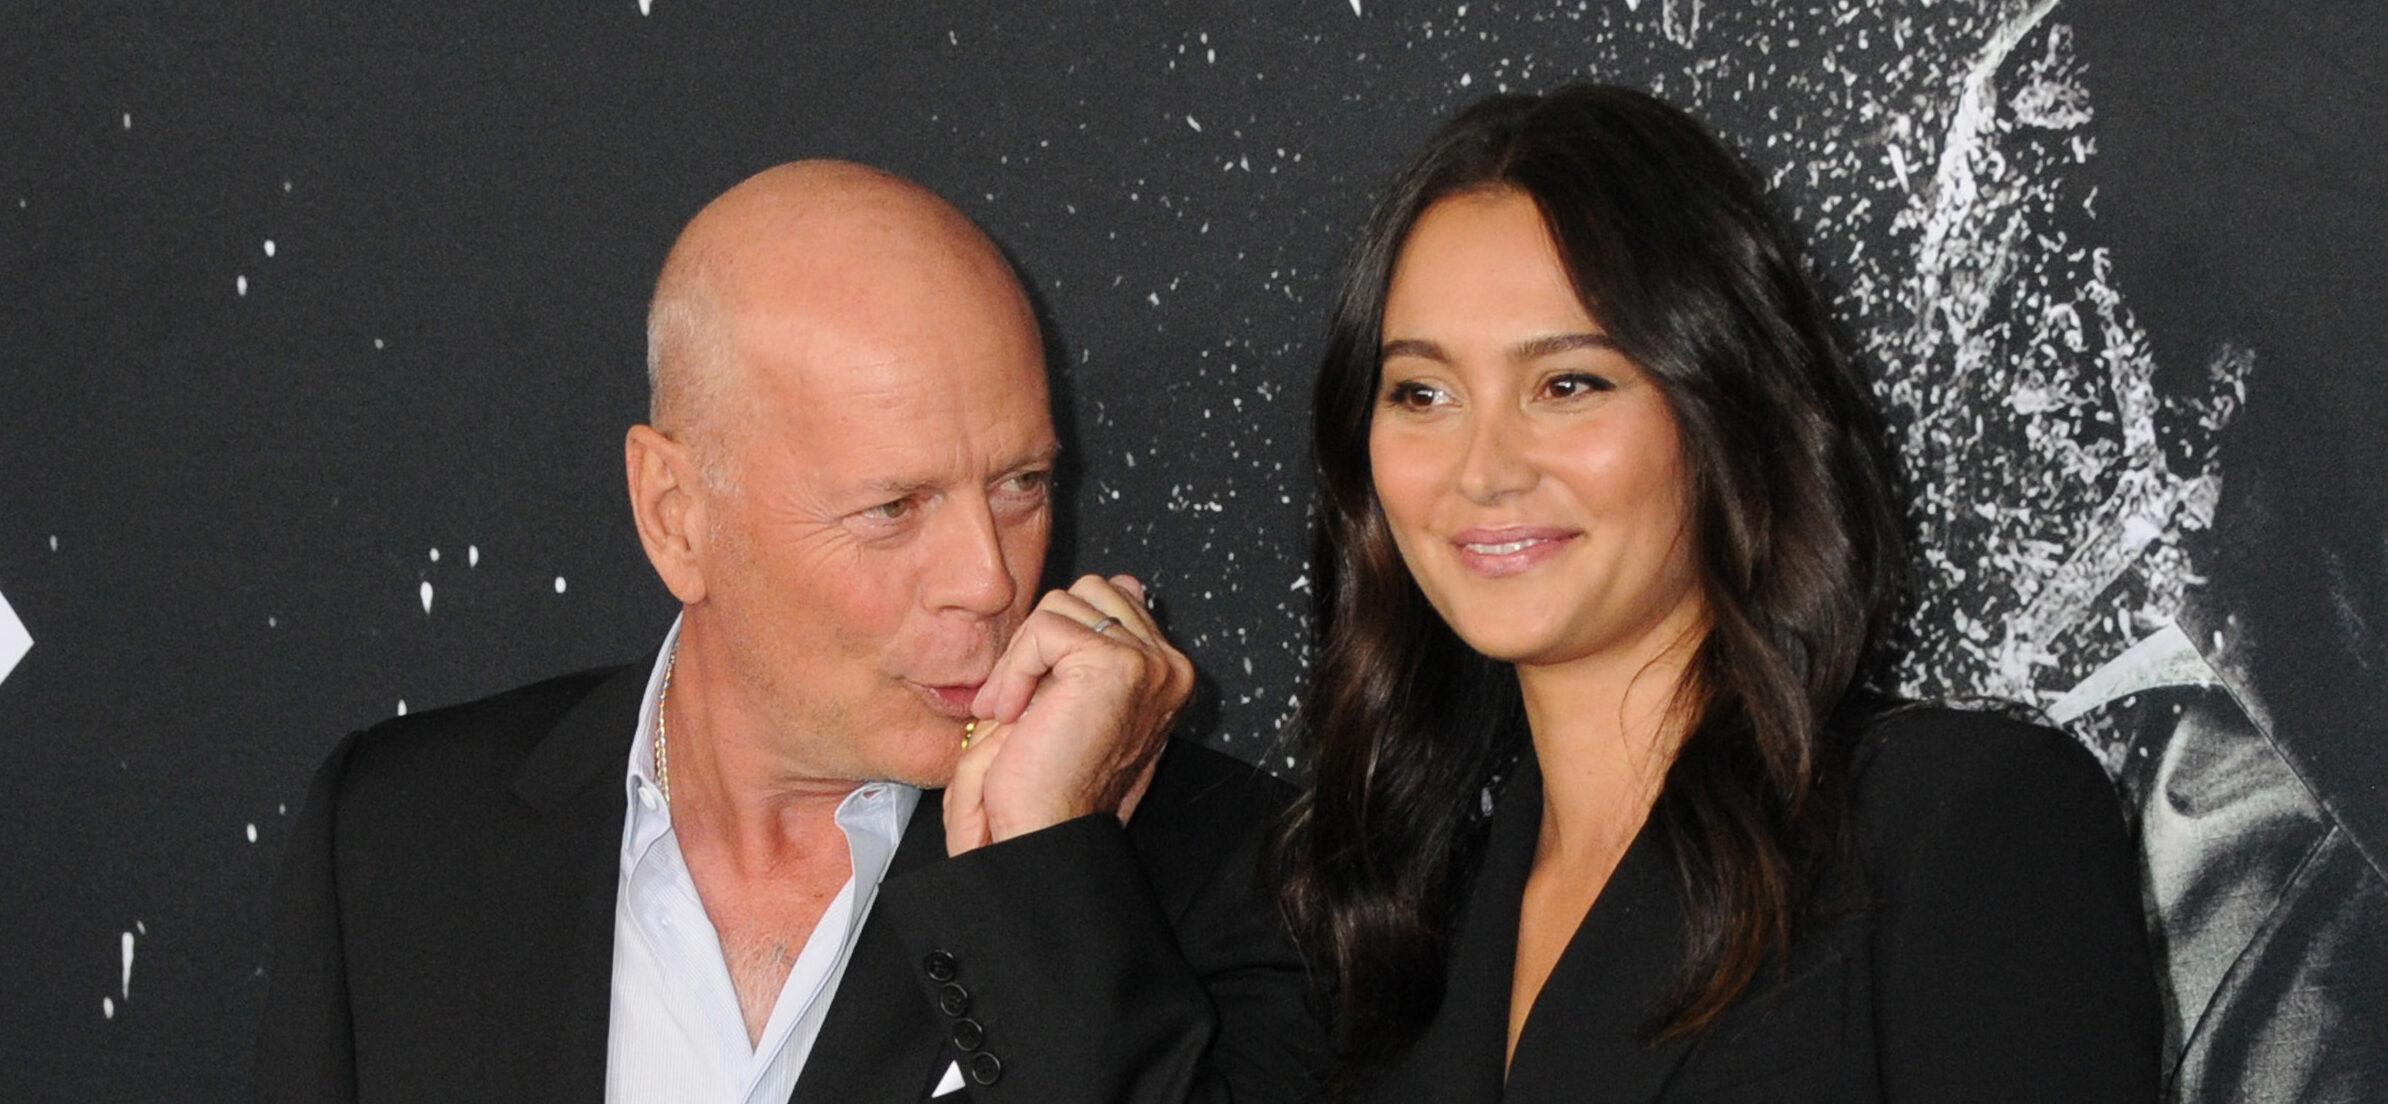 Bruce Willis’ Wife Emma Receives Support From Fans: ‘His Condition Has No Cure’